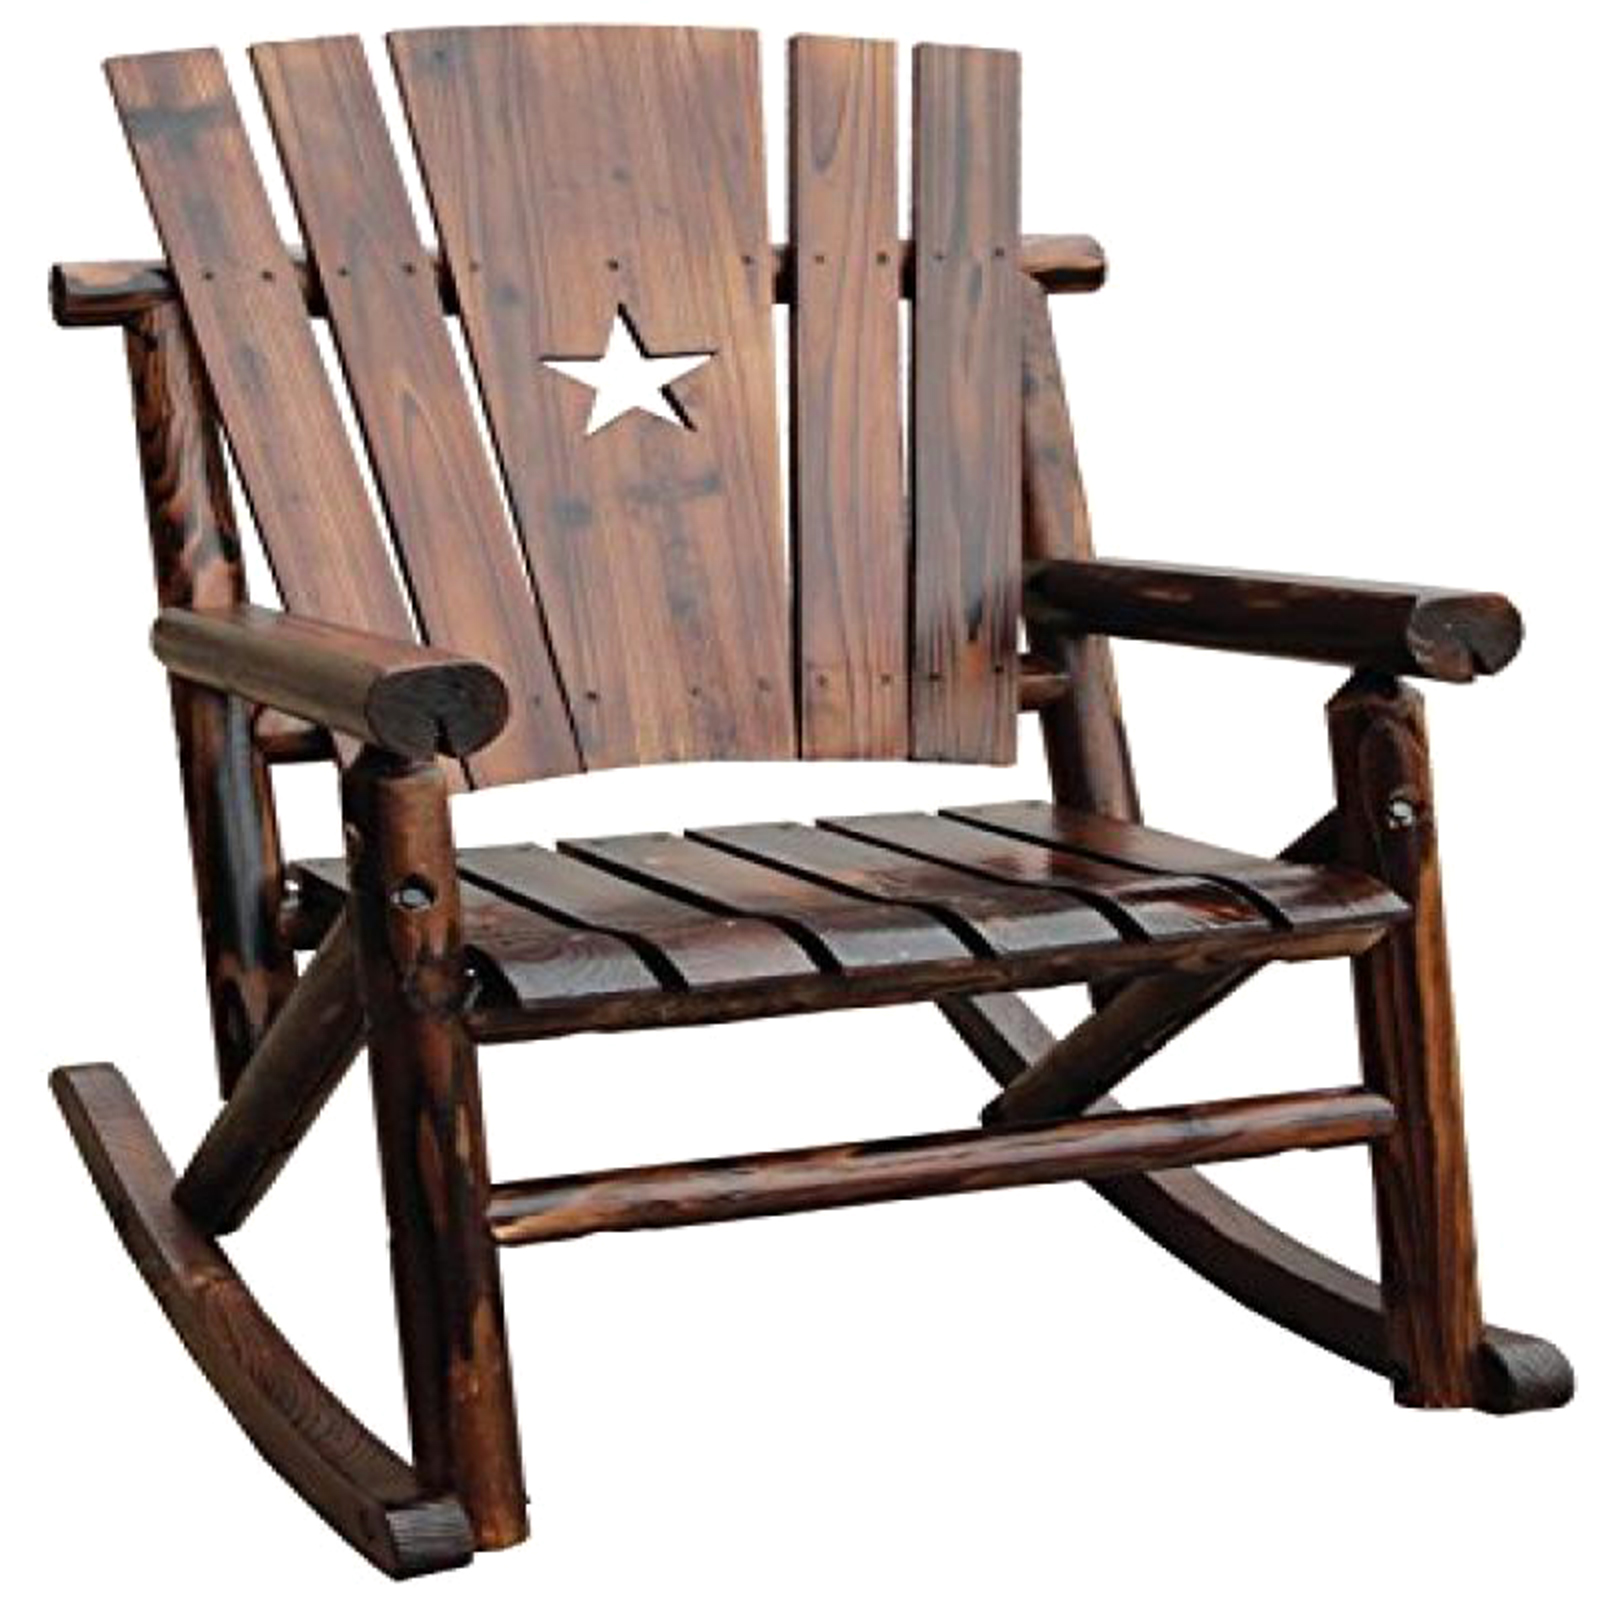 Leigh Country 44.5"H Char-Log Single Rocker with Star Motif - Varnished Finish